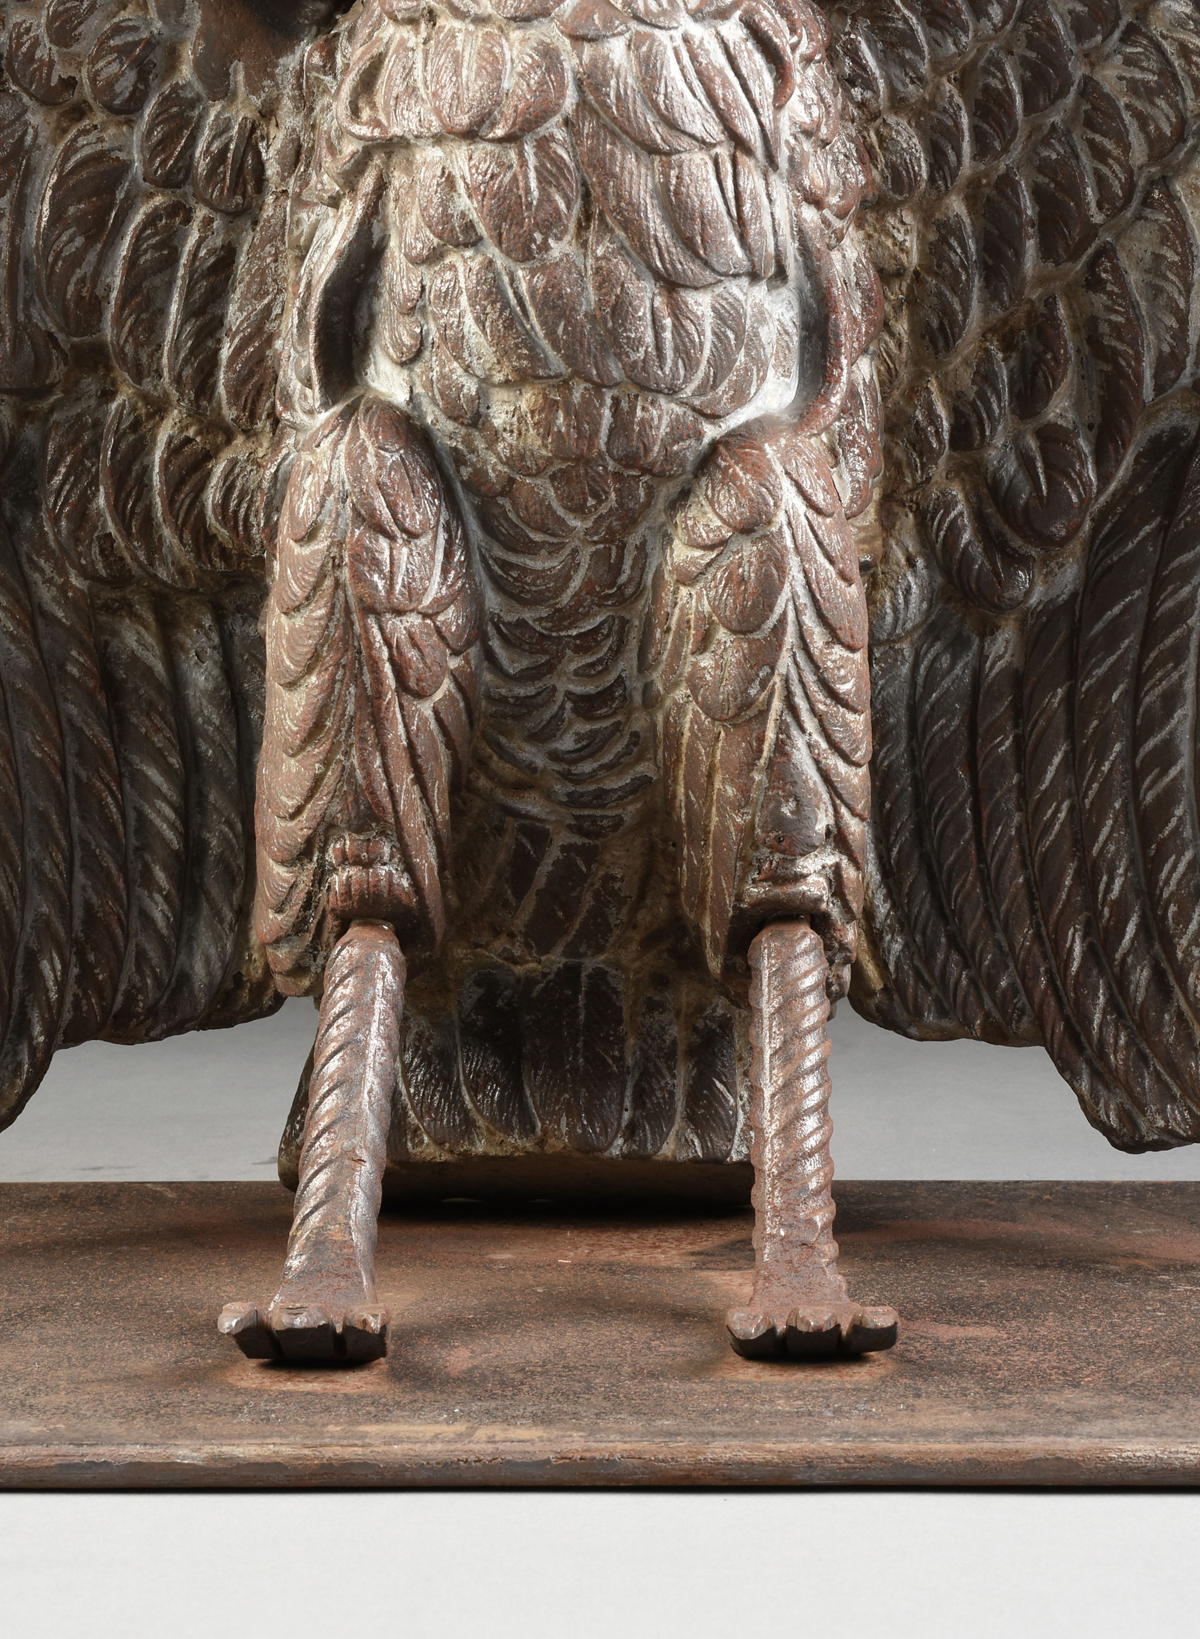 AN AMERICAN CAST IRON AND WELDED STEEL SPREAD WINGED EAGLE SCULPTURE, CIRCA 1900, probably once an - Image 3 of 10